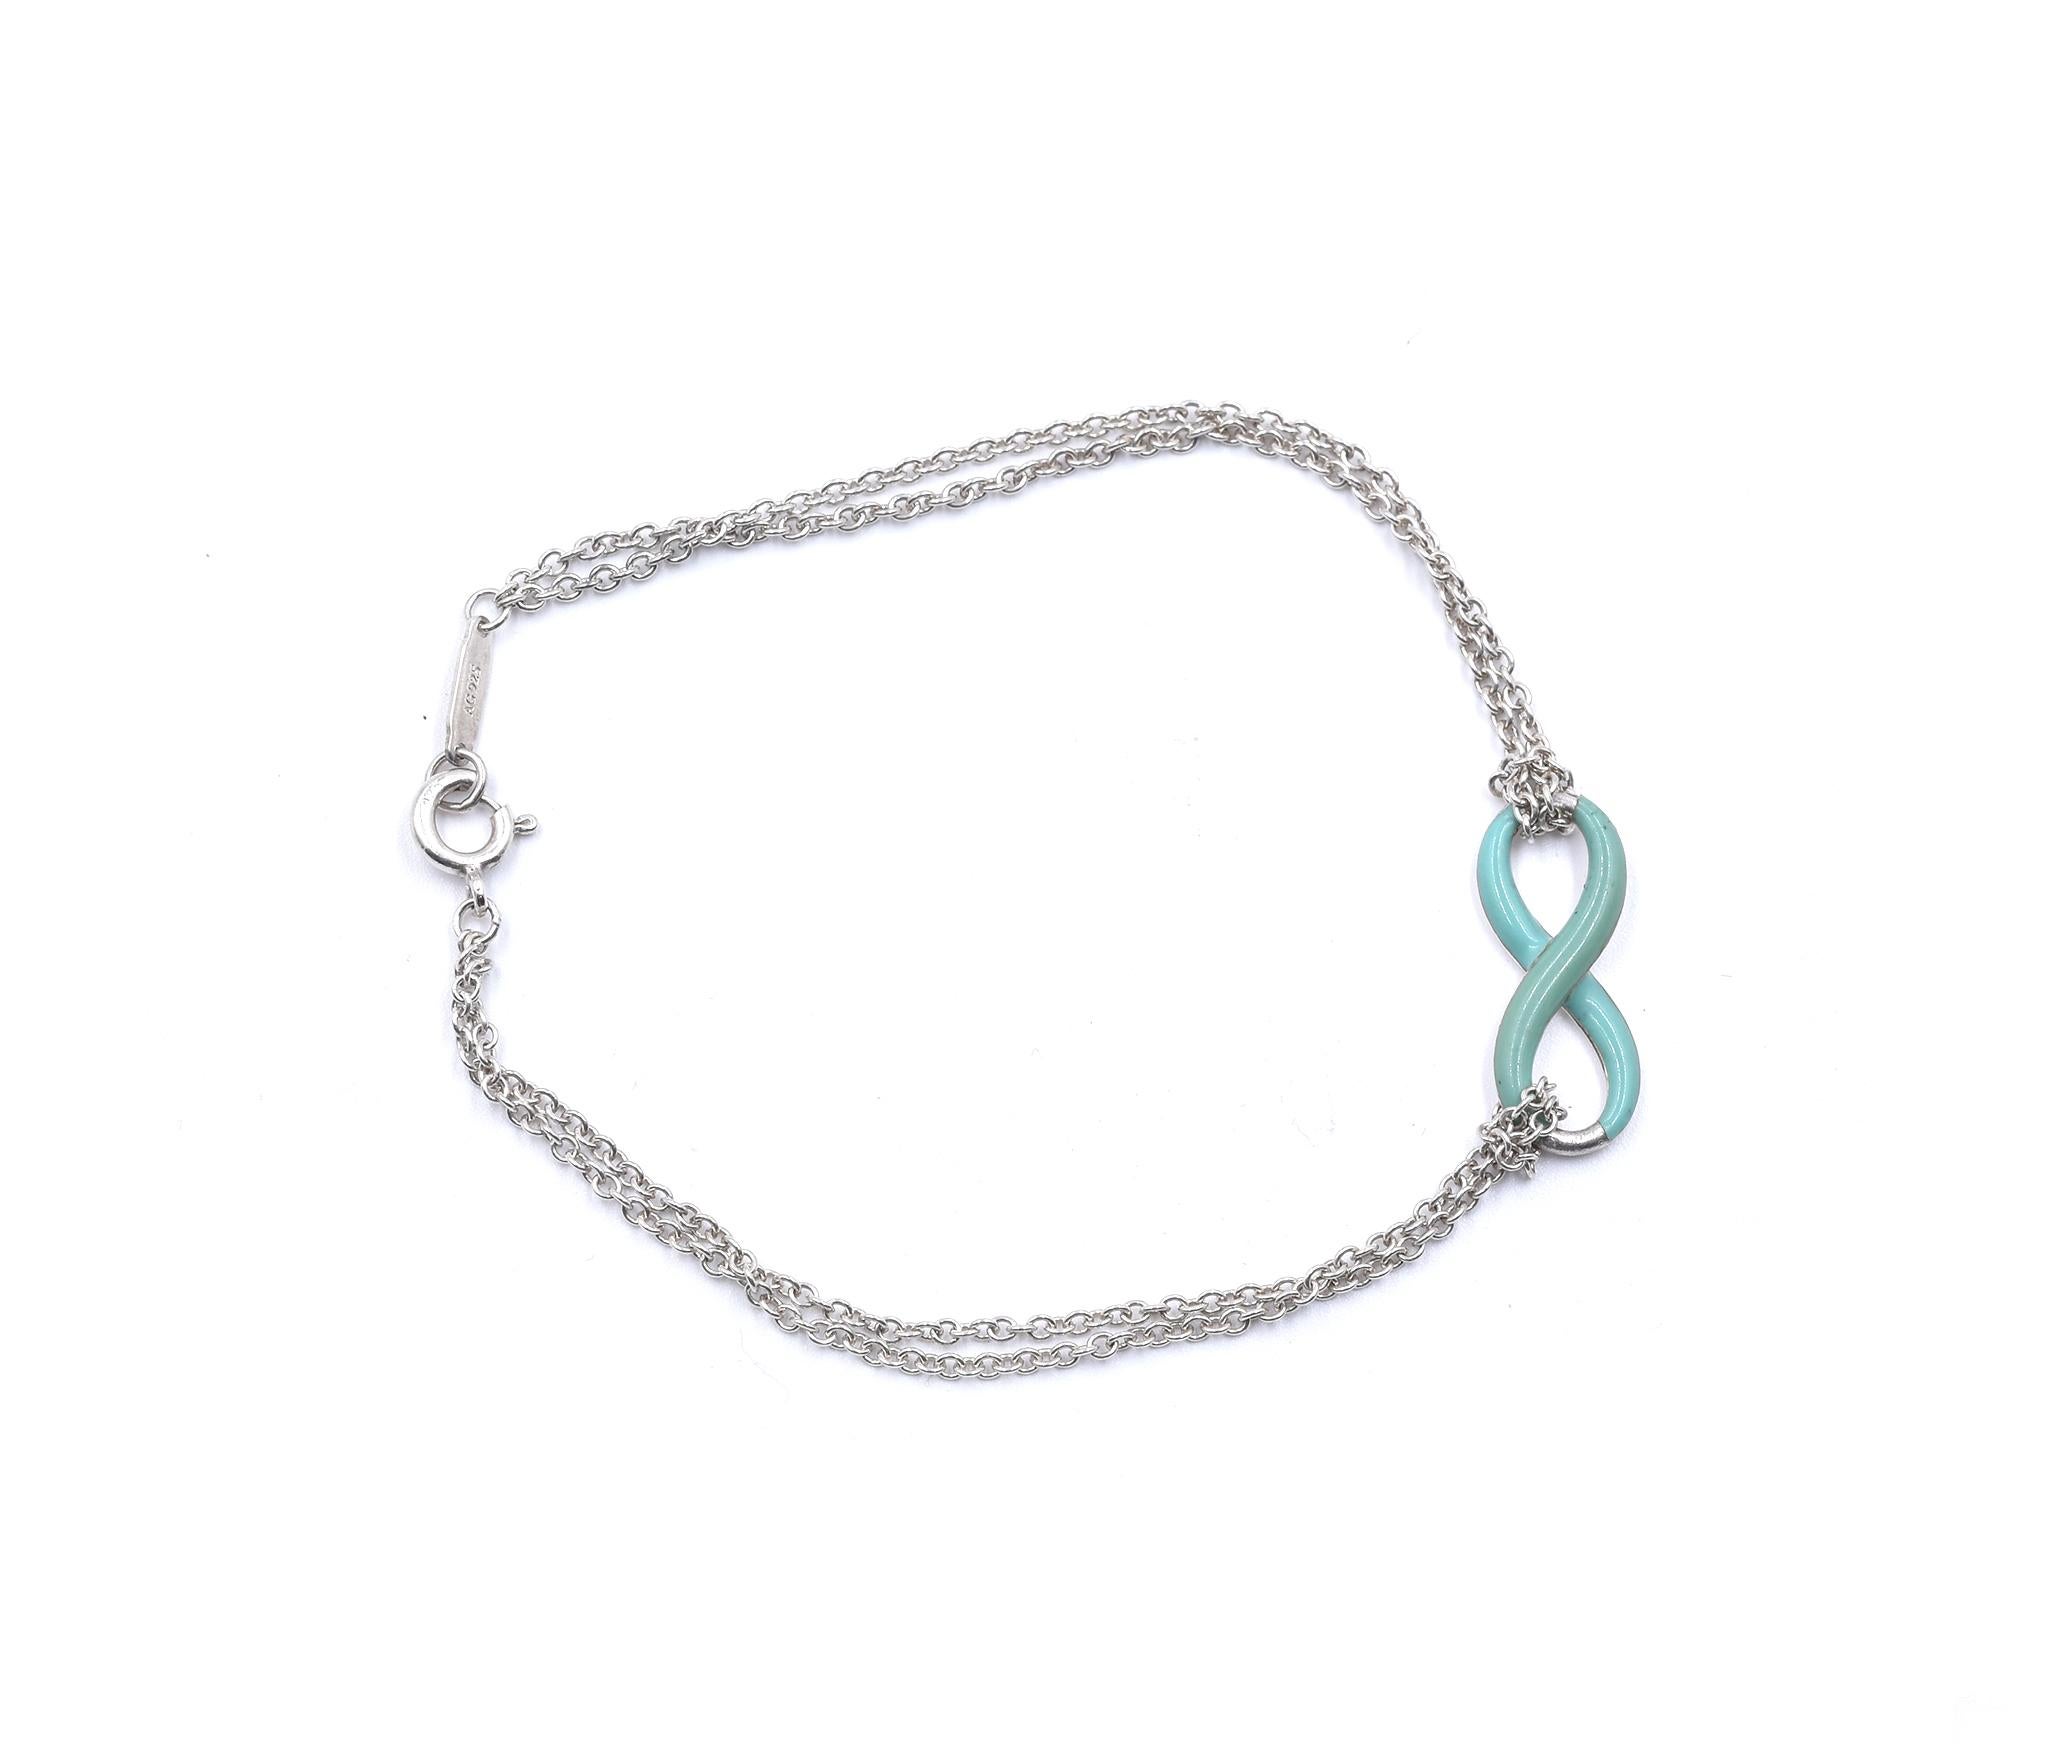 Designer: Tiffany & Co. 
Material: sterling silver
Dimensions: band measures 7.25-inches
Weight: 2.57 grams
